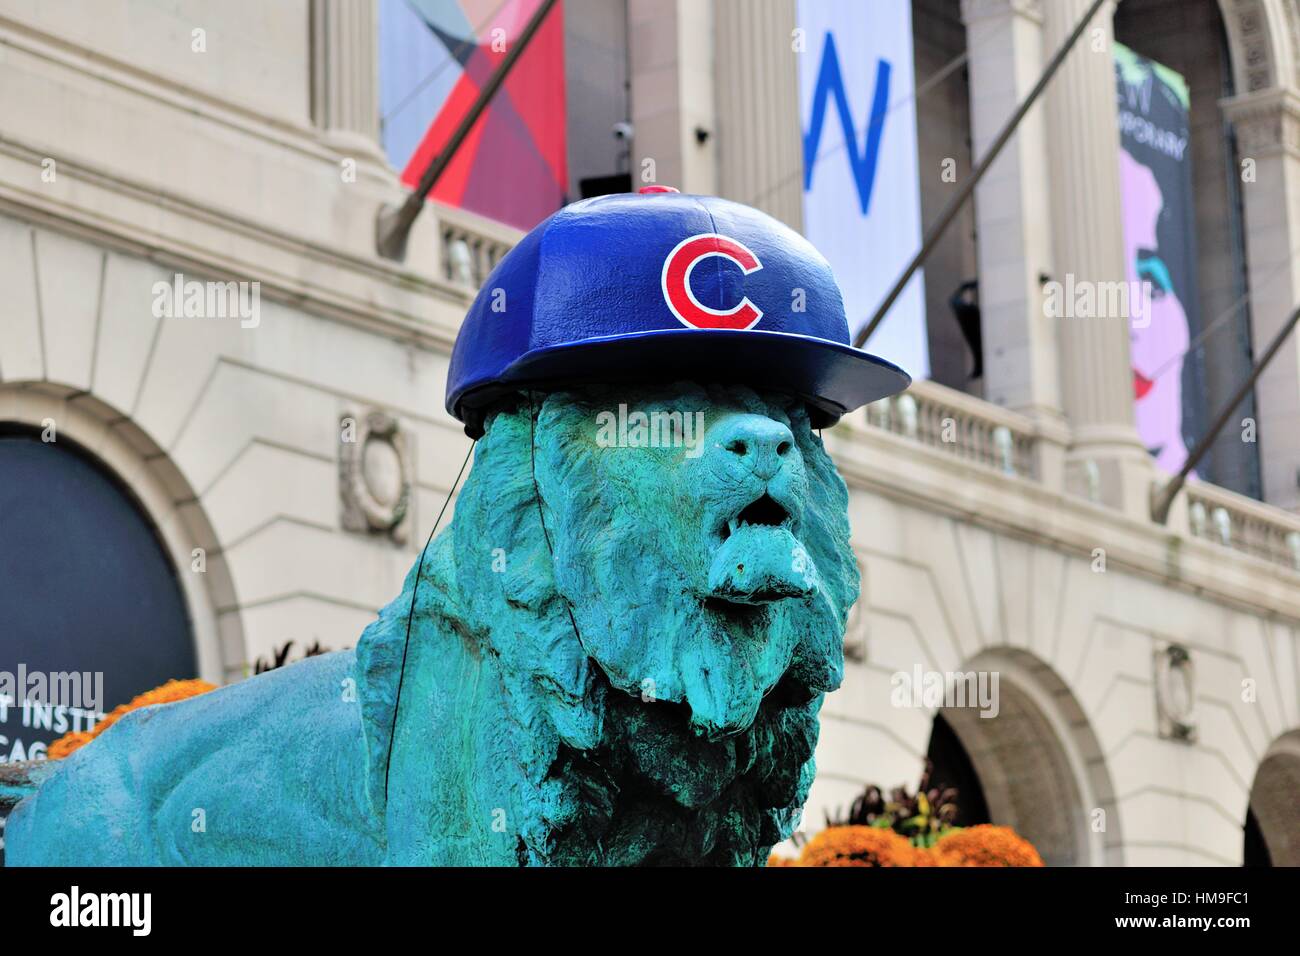 The famous lion statues in front of the Art Institute of Chicago adorned with hats as the museum paid tribute to the Cubs. Chicago, Illinois, USA. Stock Photo